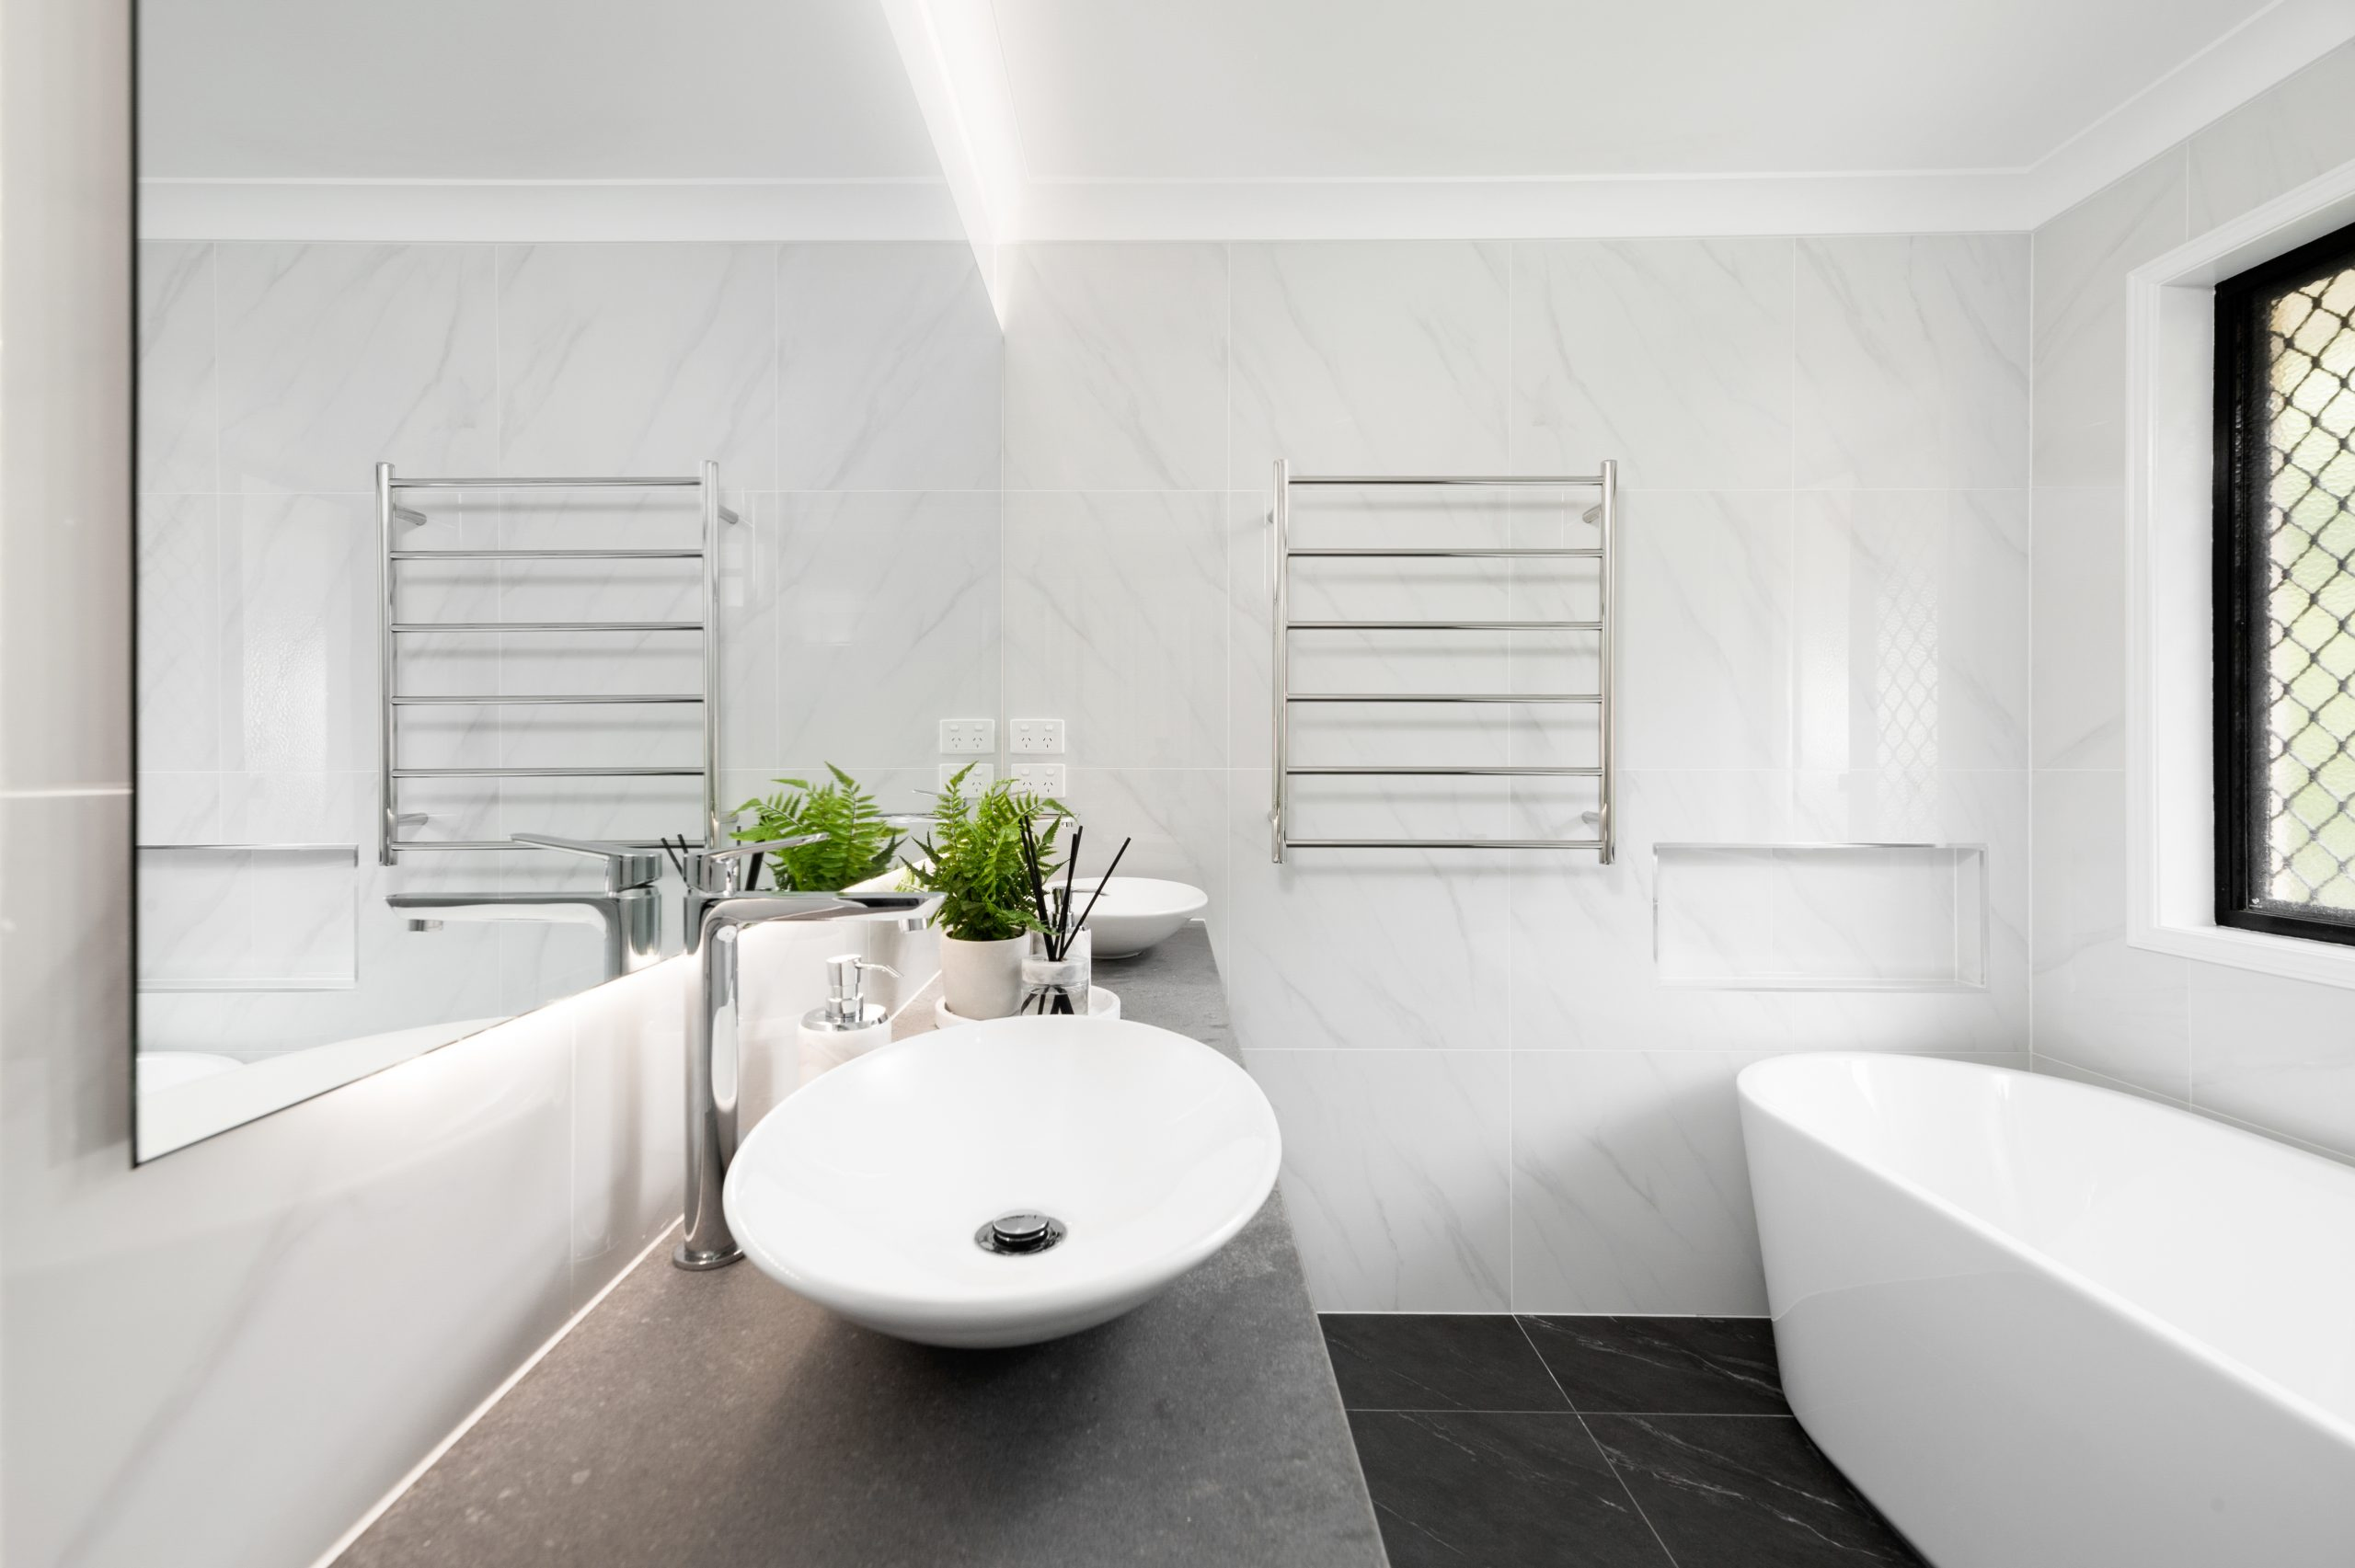 White bathroom aesthetic featuring a large wall mirror and chrome towel rail.